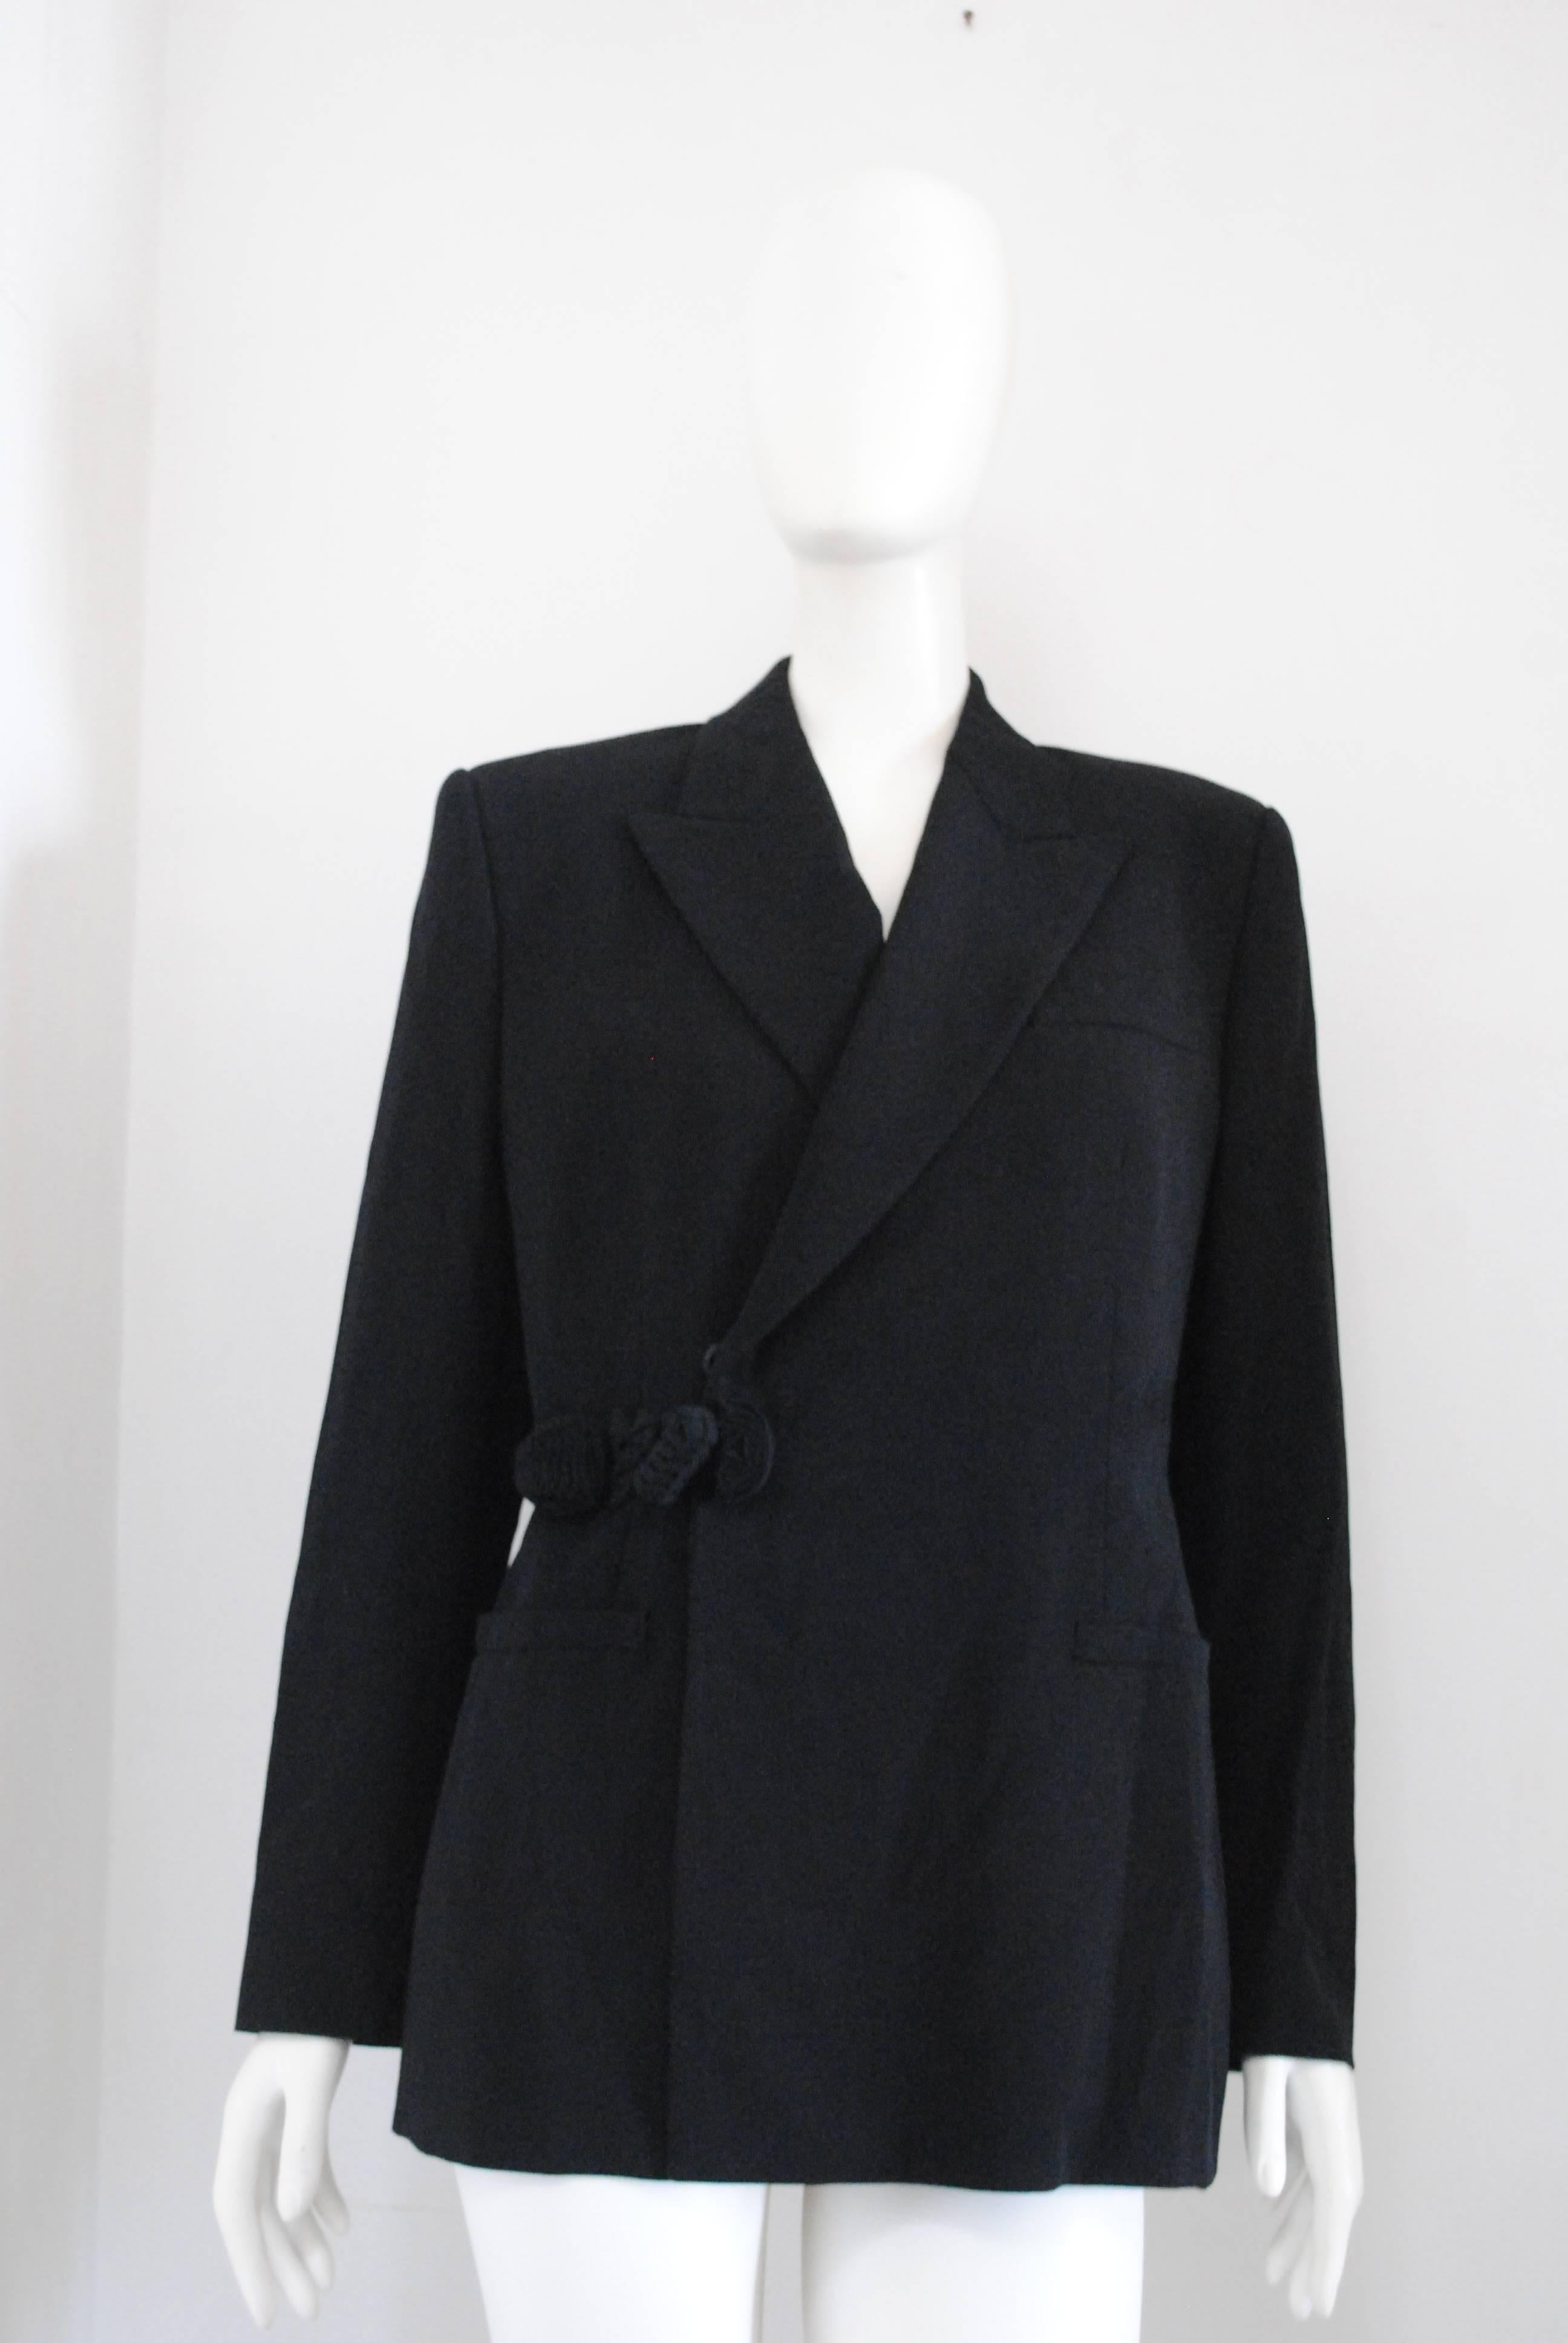 1997 - 1998 Rare Jean Paul Gaultier Black Jacket

Gaultier rare classique jacket totally made in italy in size 44

Composition: Wool

Lining: rayon acetate


